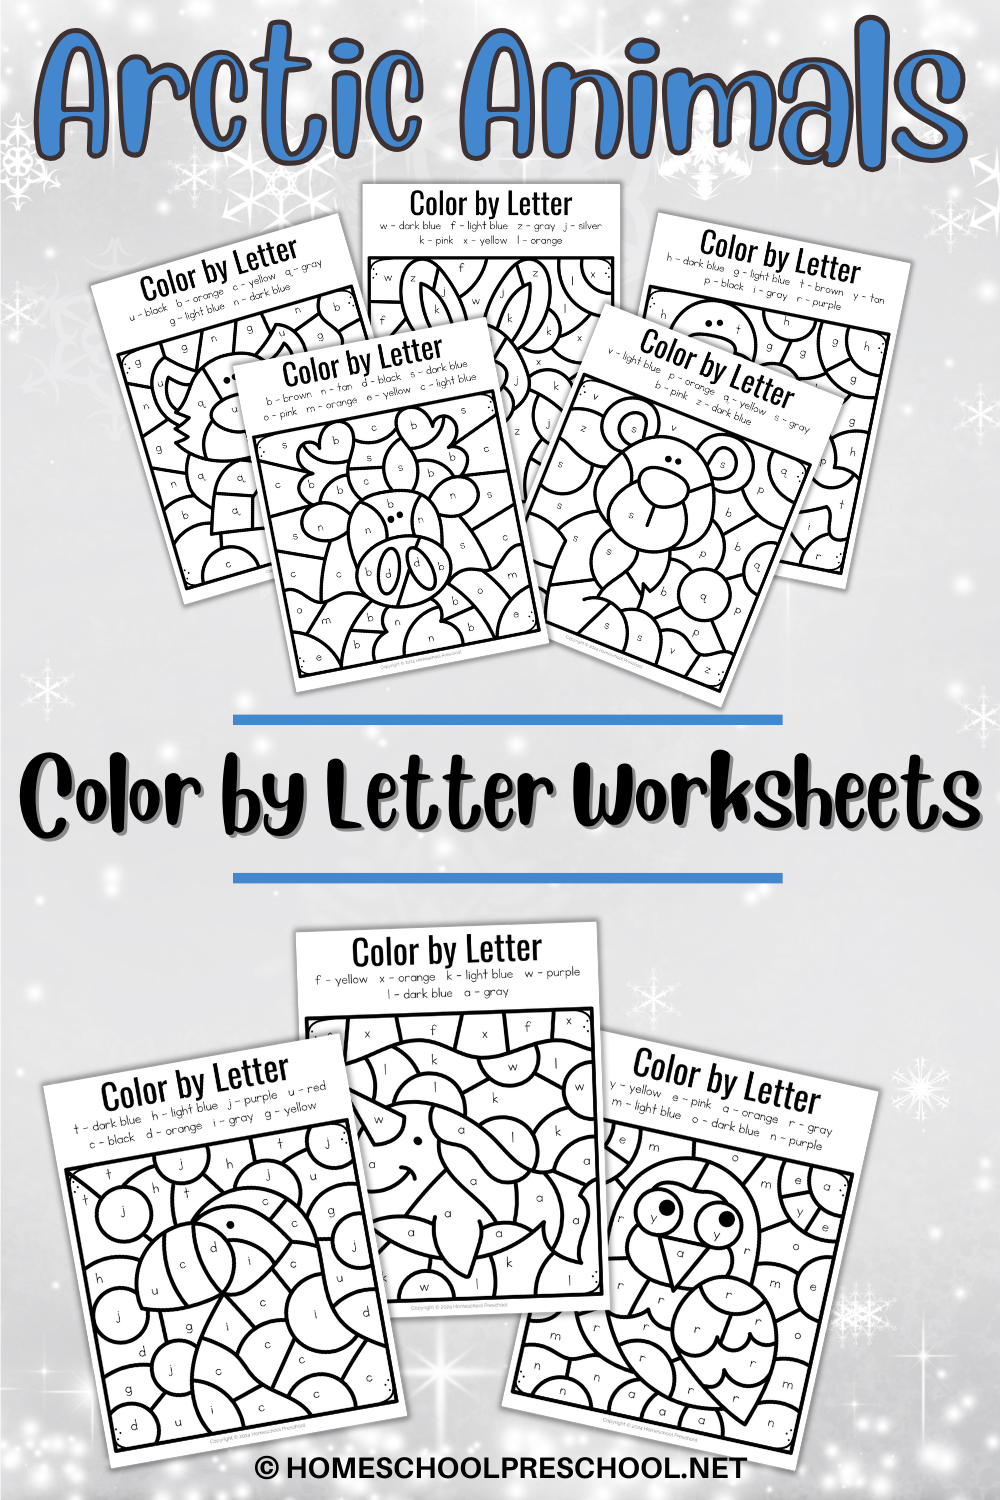 arctic-animals-color-by-letter-printable Arctic Animals Color by Letter Printable